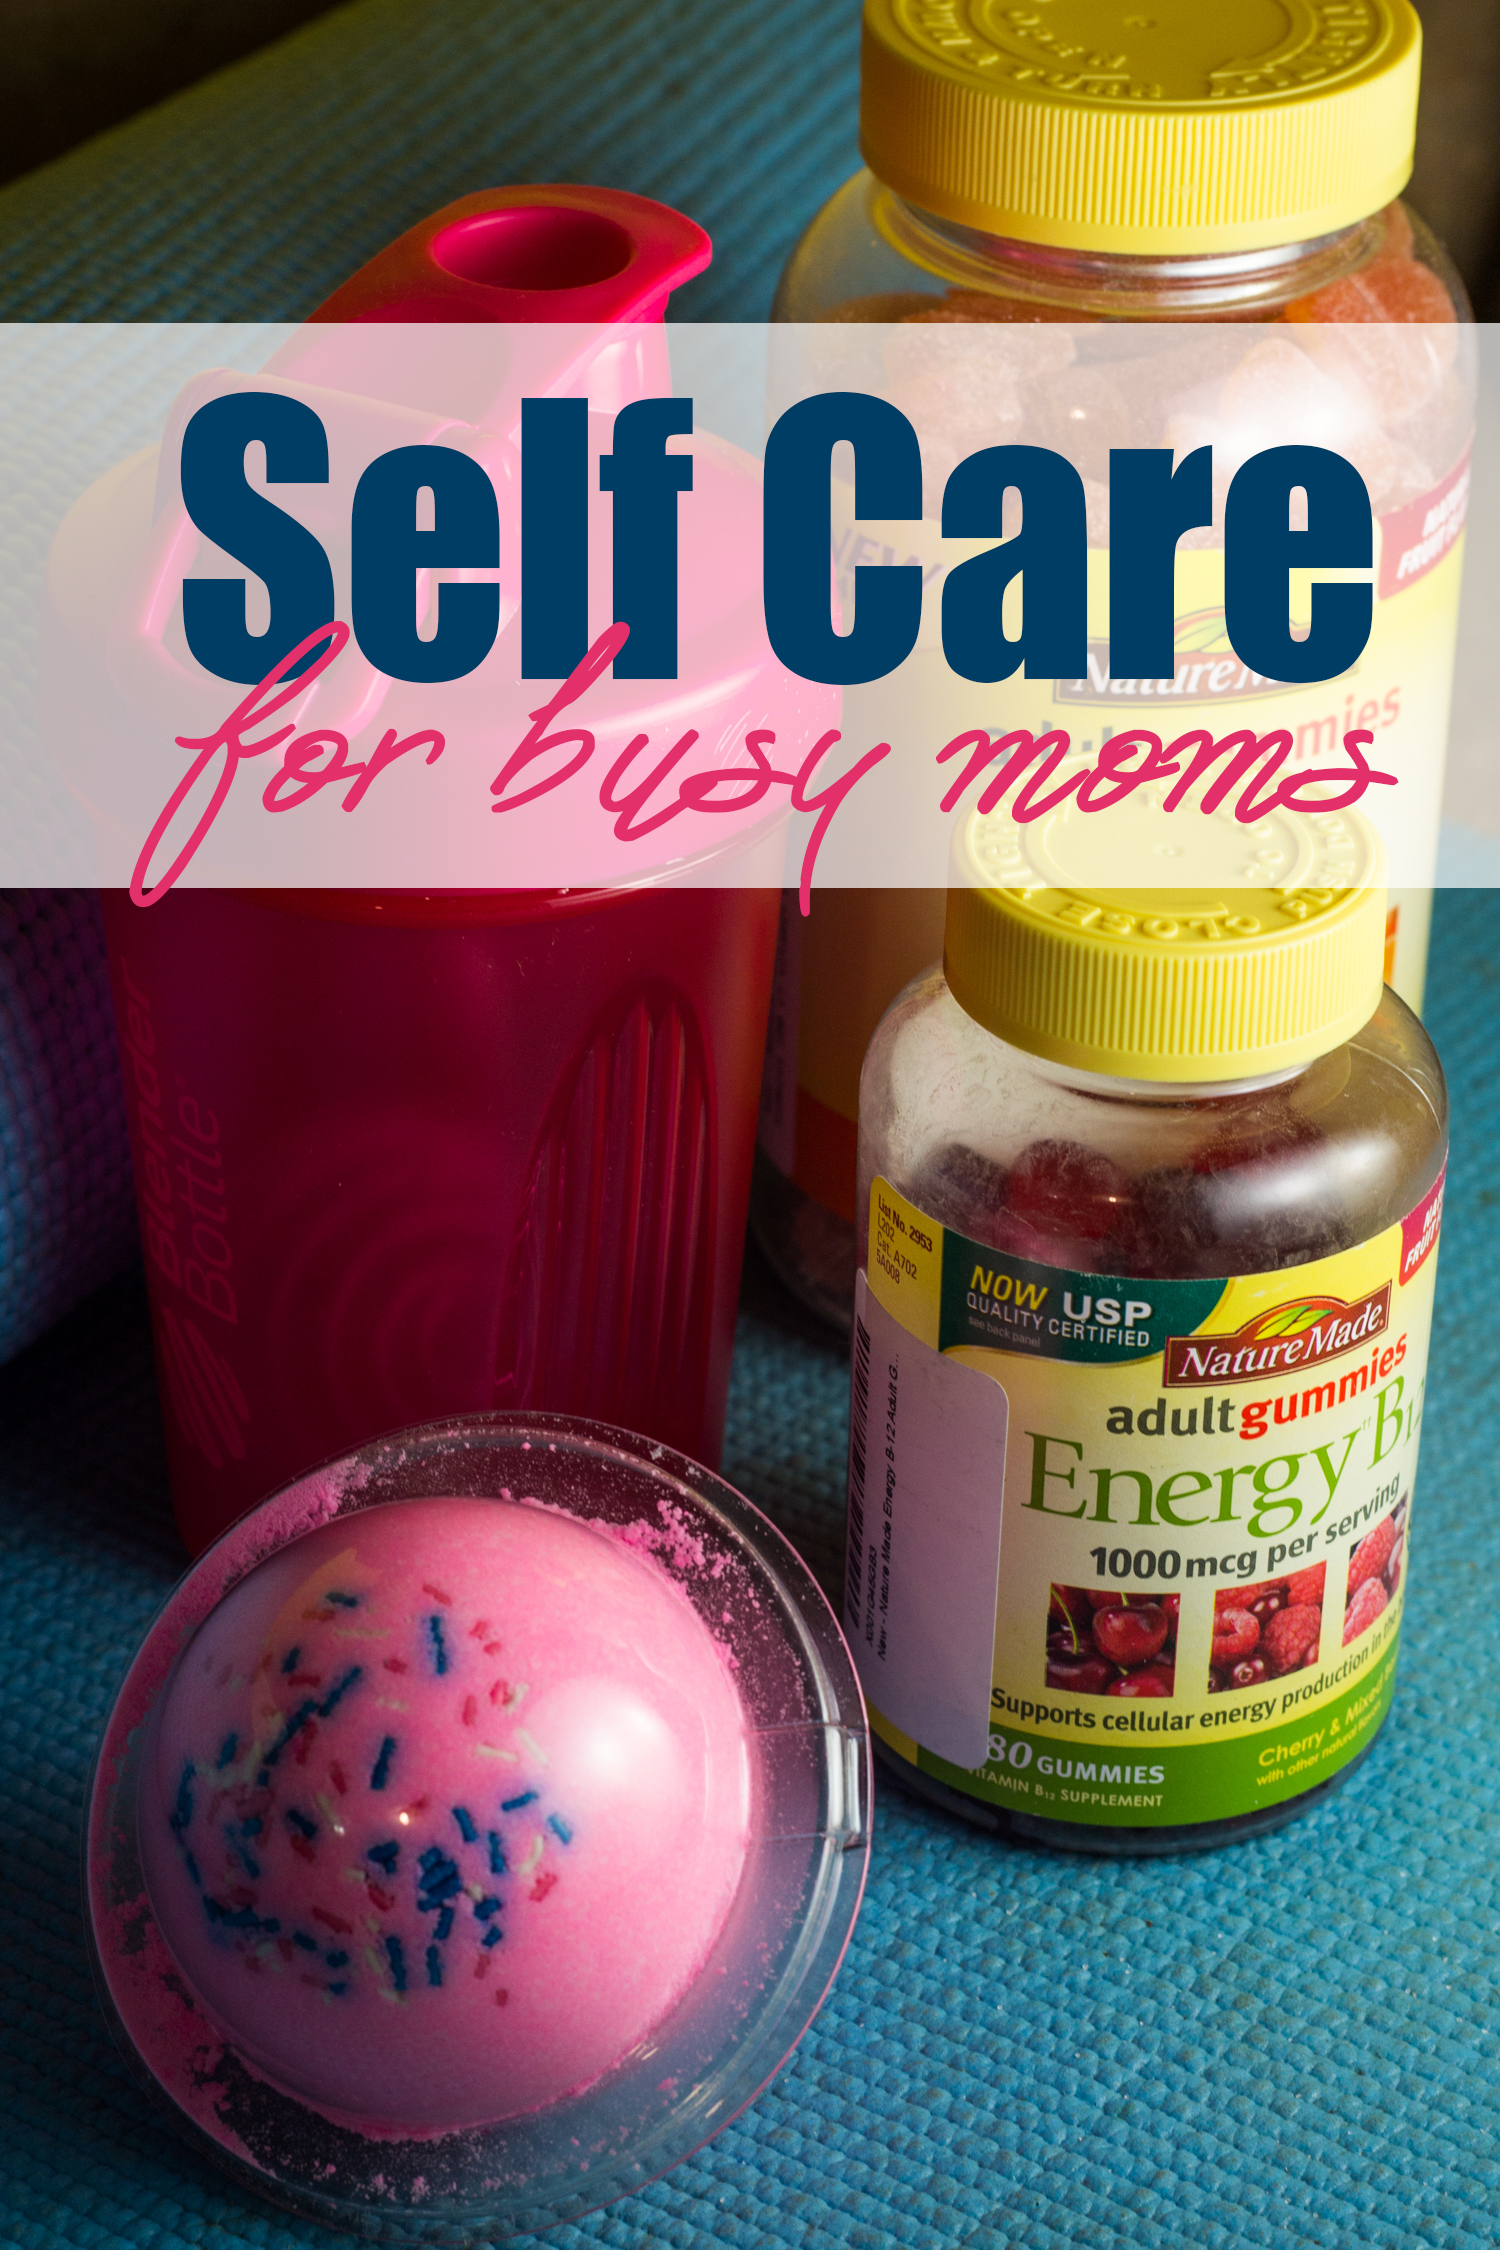 Taking care of a family is impossible if you haven't taken time to care for yourself, too. It isn't selfish to make sure you're in top form for those you love. Here are my favorite self-care tips for busy moms who may not feel like they have a ton of time for themselves. One tip is to be sure to take your vitamins daily, like Nature Made® Energy†† B12 Adult Gummies and Nature Made® Vitamin C Adult Gummies. † These statements have not been evaluated by the Food and Drug Administration. This product is not intended to diagnose, treat, cure prevent any diseases. [AD] #AGummyYouCanTrust #NatureMade #NatureMadeAdultGummies #USP